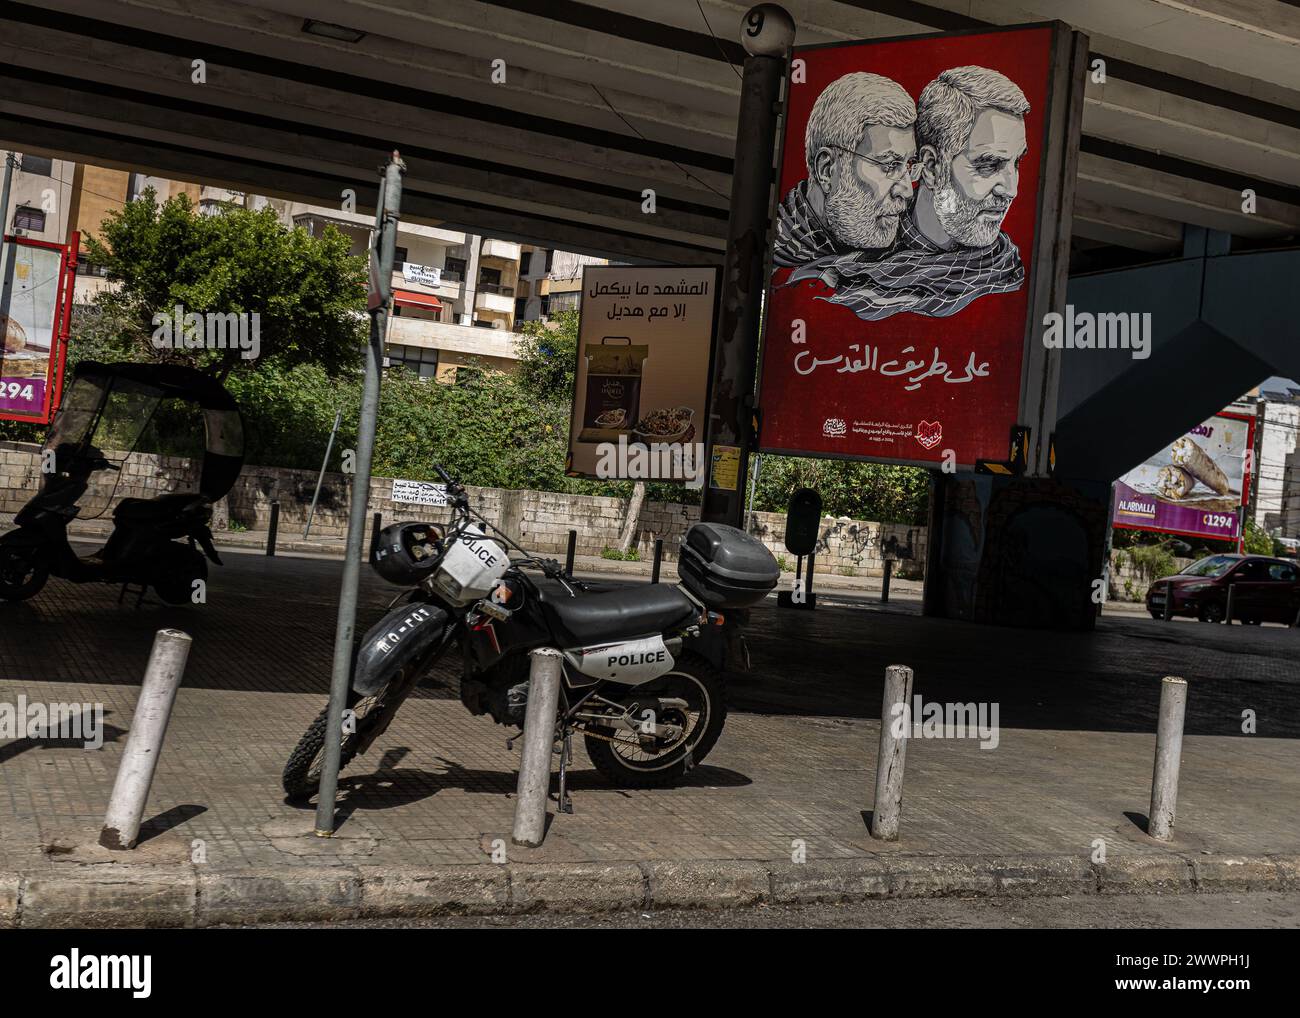 Beirut, Lebanon. 20th Mar, 2024. A portrait of slain Iranian General and Quds Force Commander Qasem Soleimani and Iraqi Popular Mobilization Forces (PMF) commander Abu Mahdi al-Muhandis in the Dahieh suburb of Beirut, Lebanon, on Mar. 20, 2024. Soleimani and Muhandis were assassinated by a US drone strike on Jan. 3, 2020. Dahieh is a Hezbollah-controlled neighborhood in Beirut. (Photo by Collin Mayfield/Sipa USA) Credit: Sipa USA/Alamy Live News Stock Photo